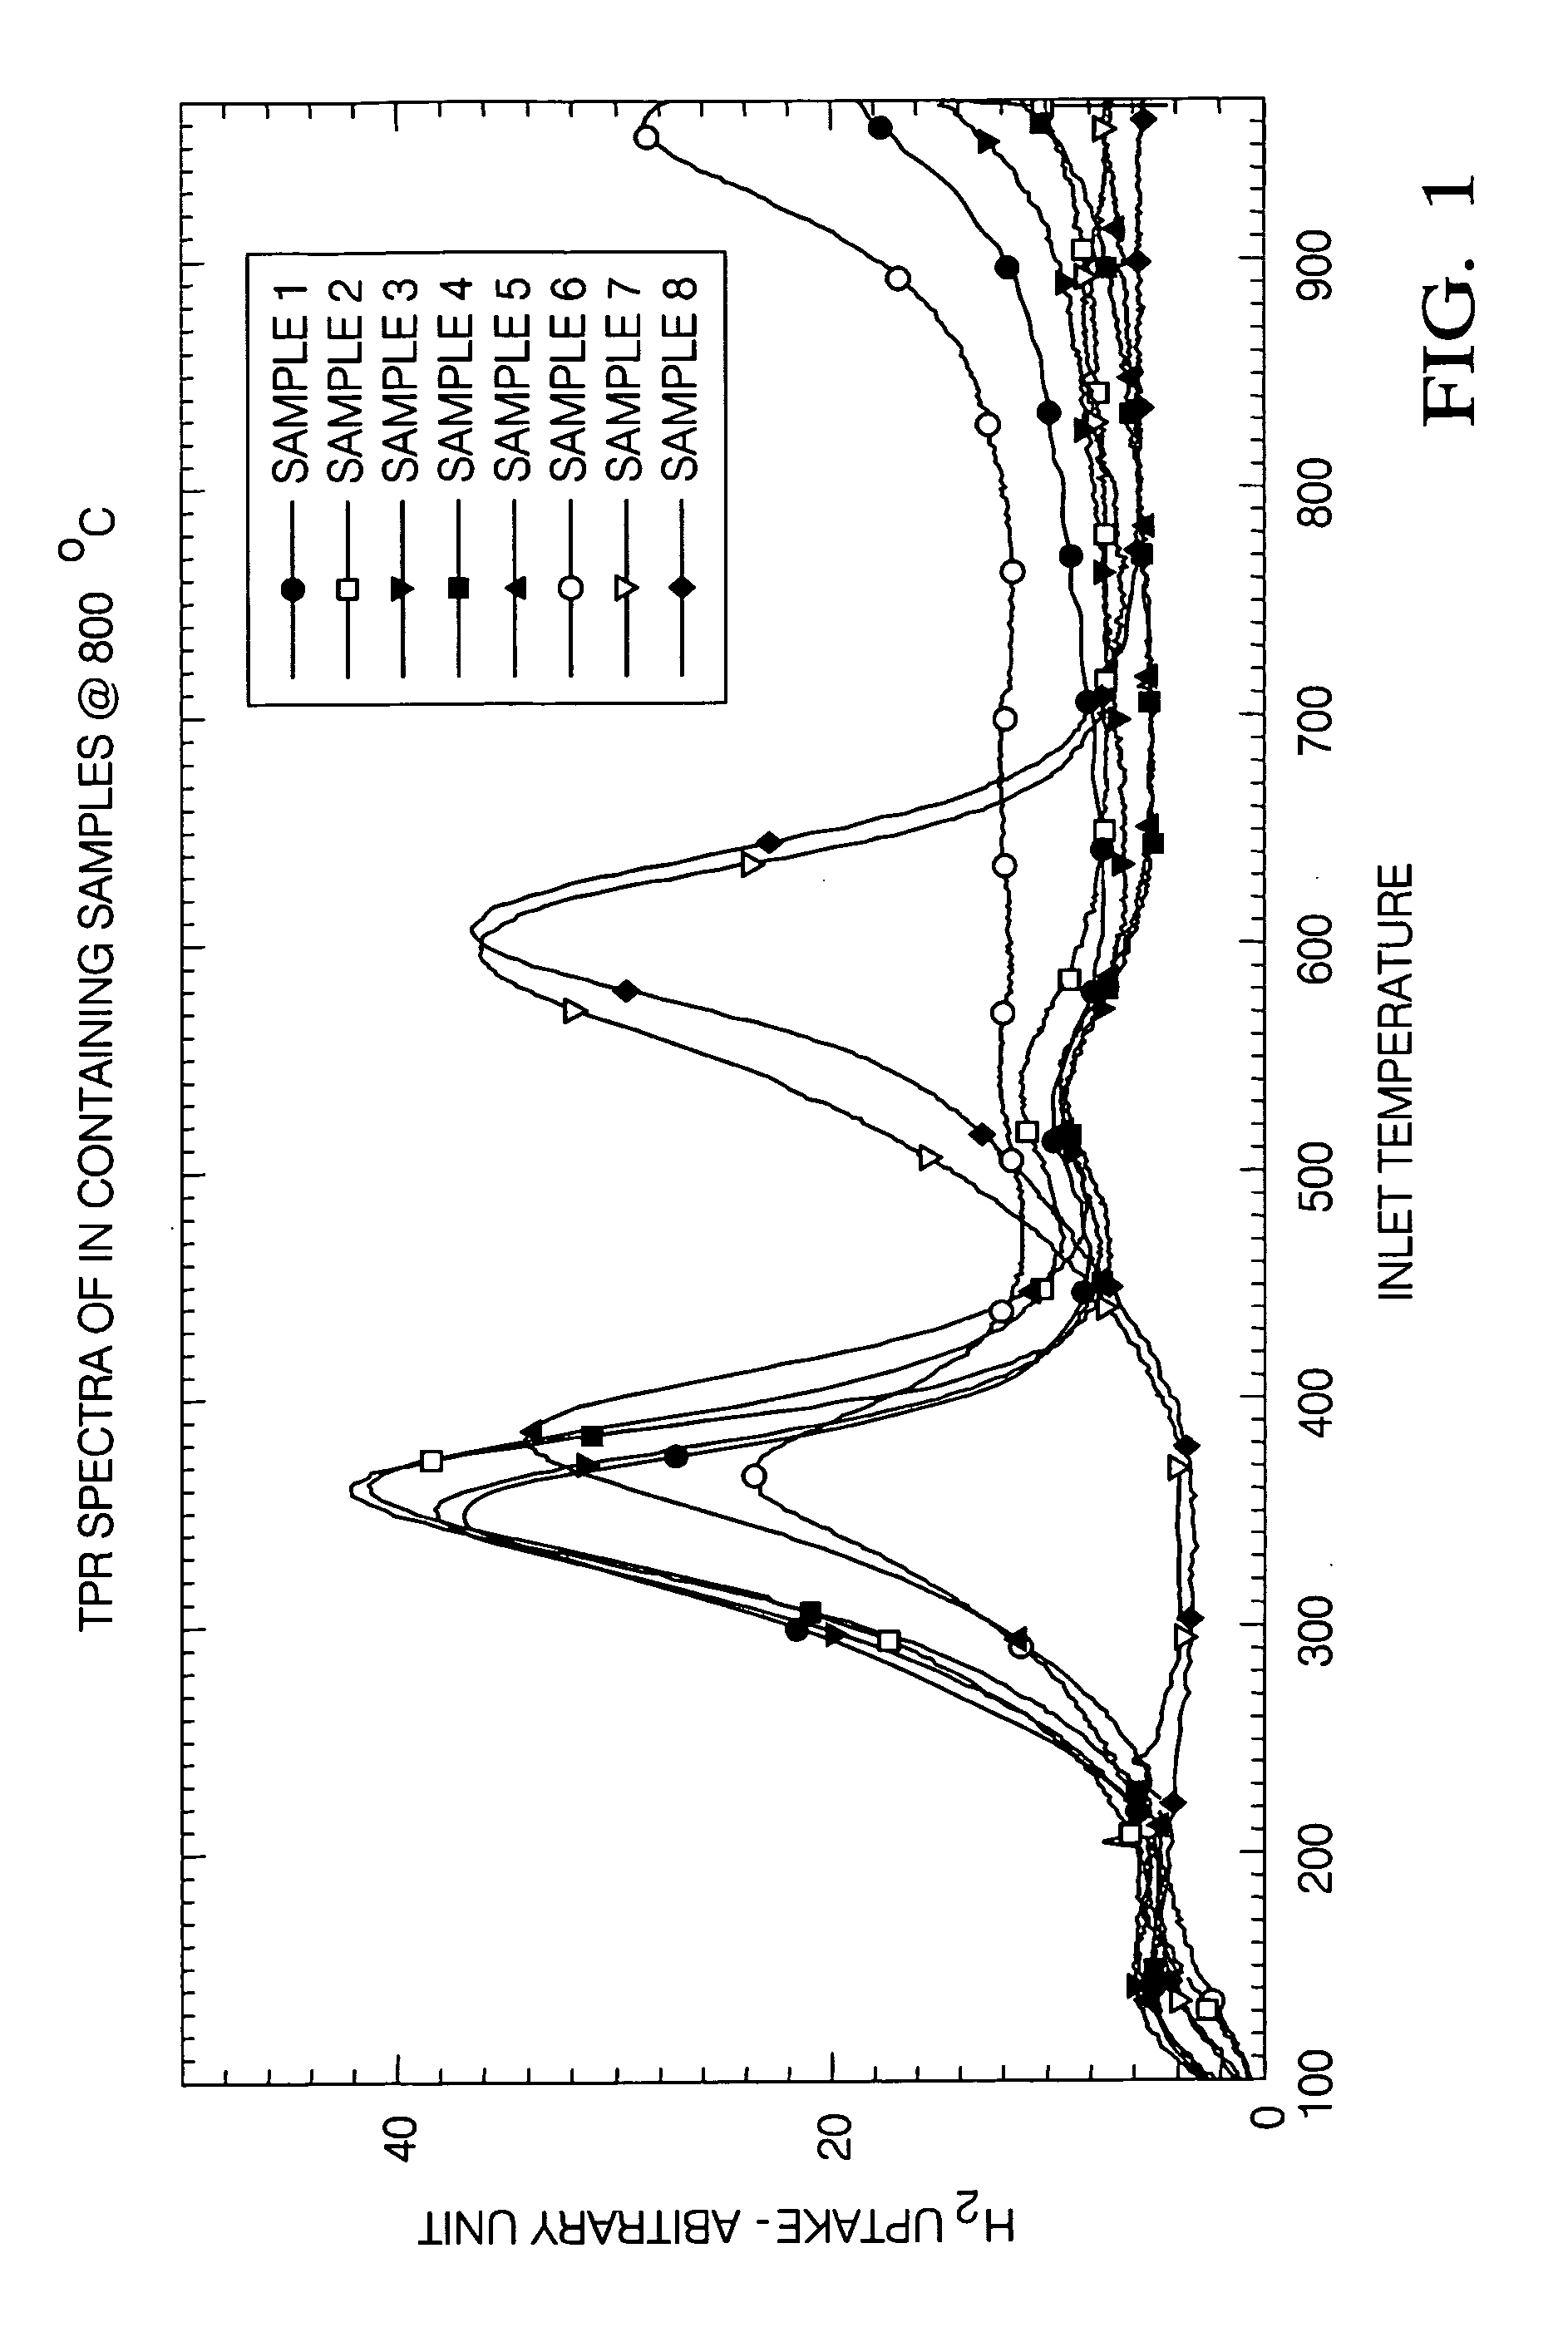 Ce-Zr based solid solutions and methods for making and using the same